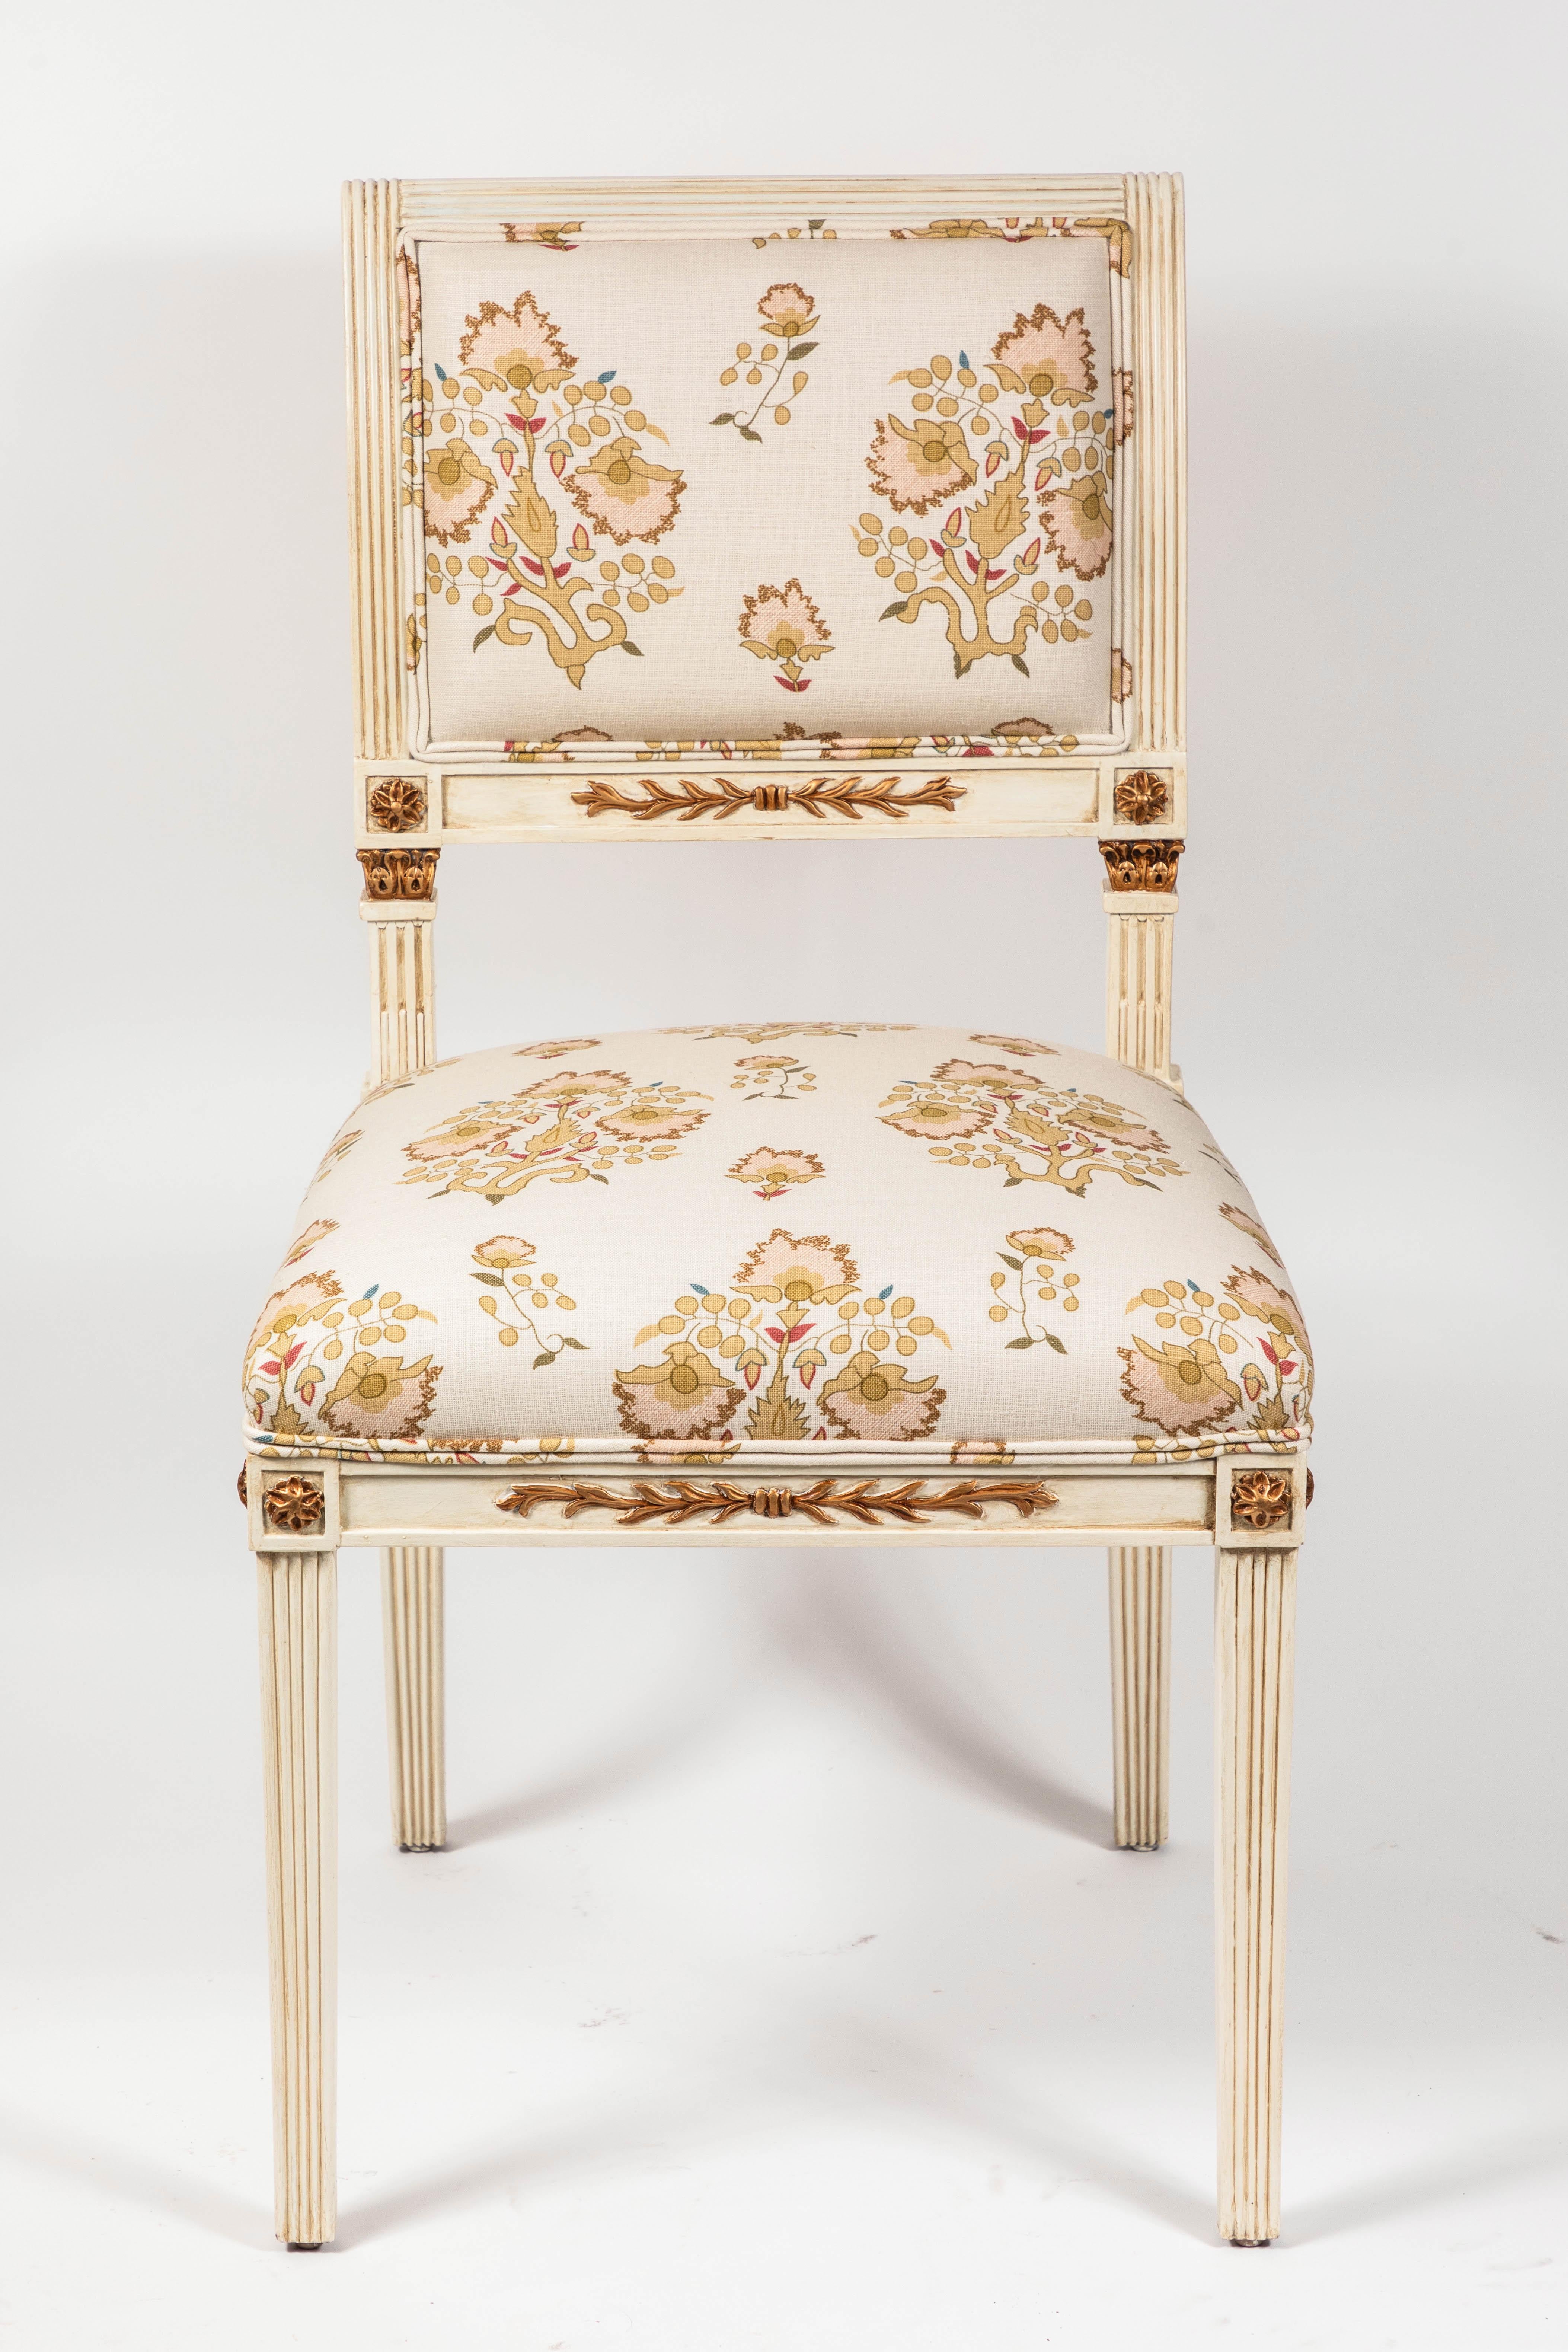 Set of 6 French country style dining chairs newly upholstered in Penny Morrison 100% linen “Rumeli.” 

Solid hard wood frames w/ new painted finish of antique white w/ gold details.

*4 additional chairs available.